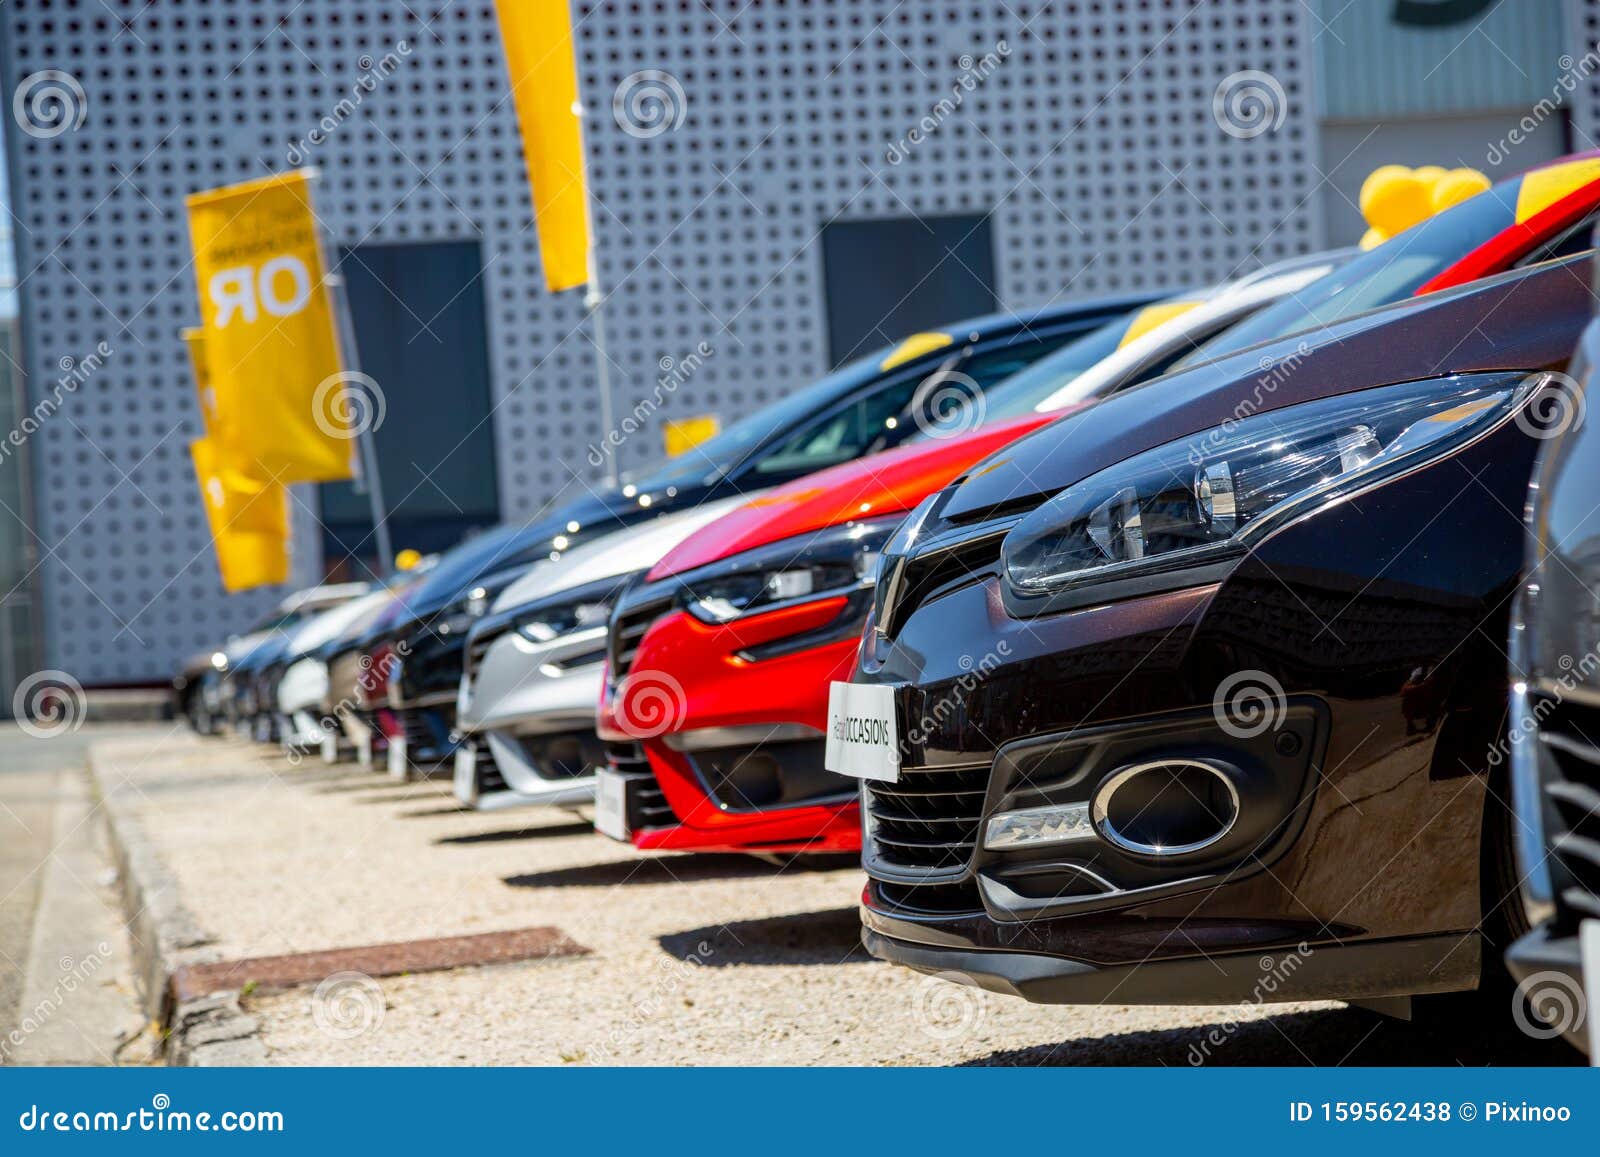 Alignment of Renault Cars of Various Types Exposed on Showroom Park of a Car Dealership Editorial Stock Photo - Image of brand, business: 159562438